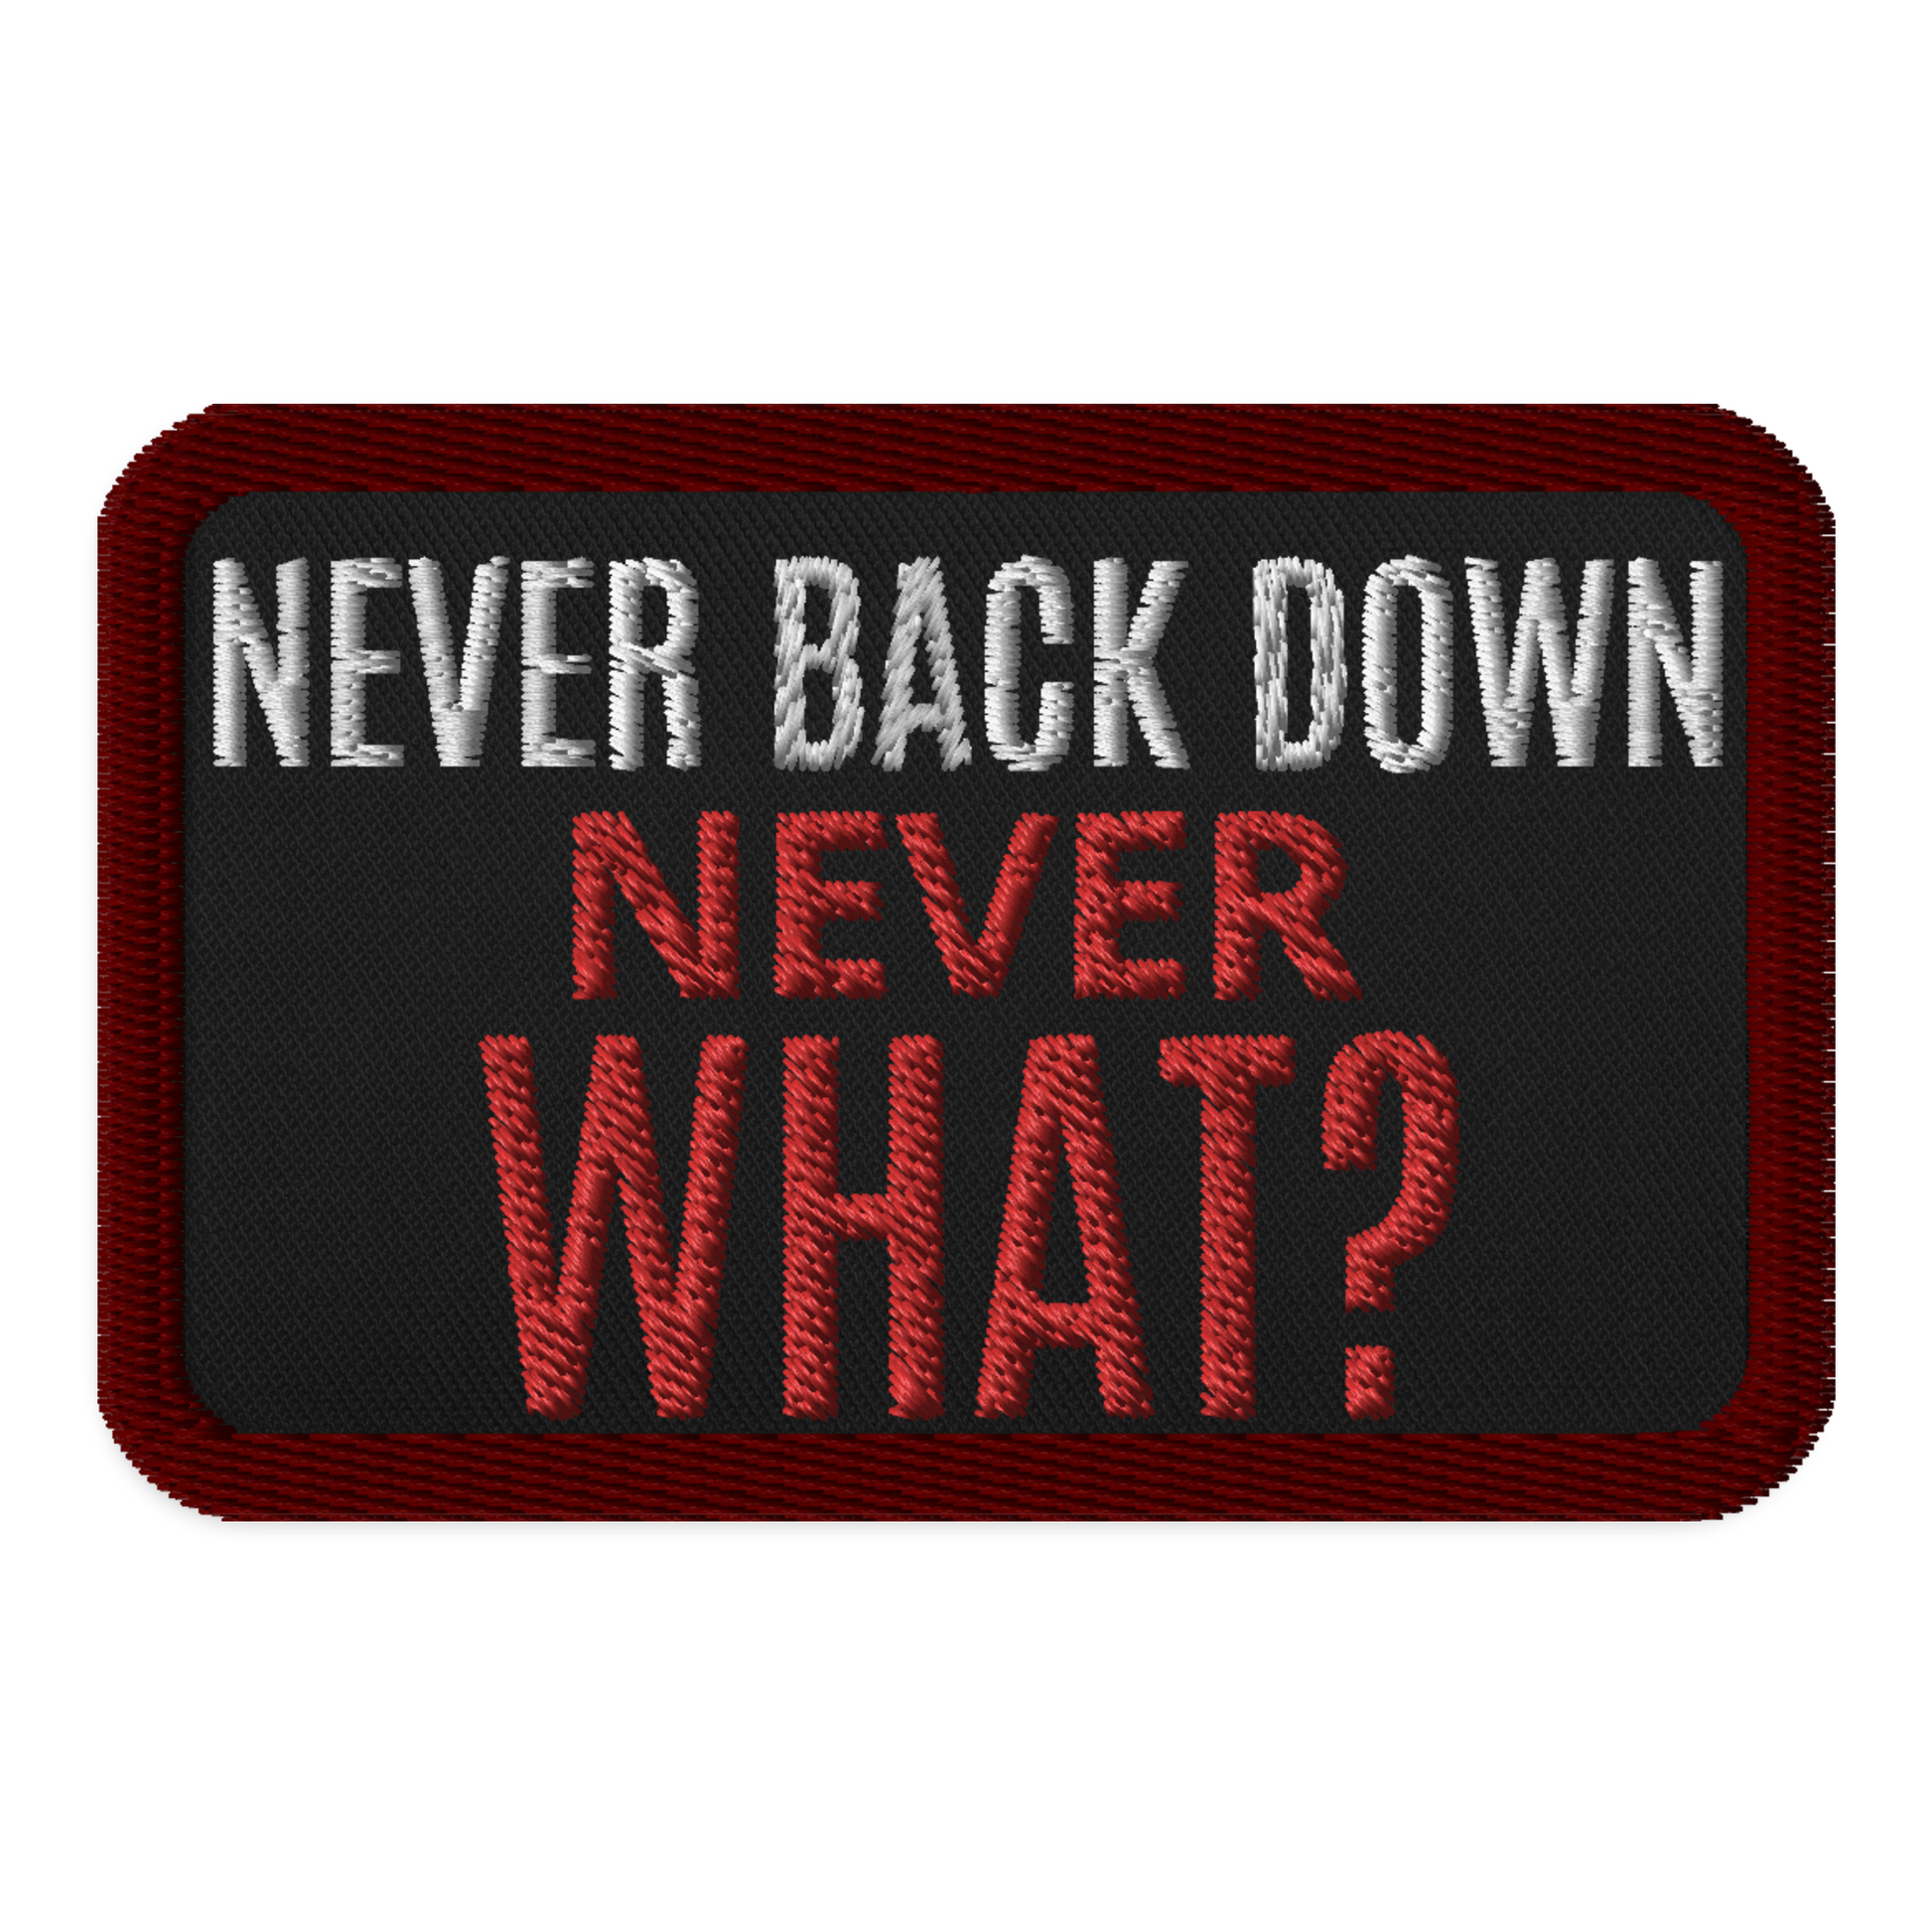 Never Back Down Never What? Meme Poster for Sale by NateCF